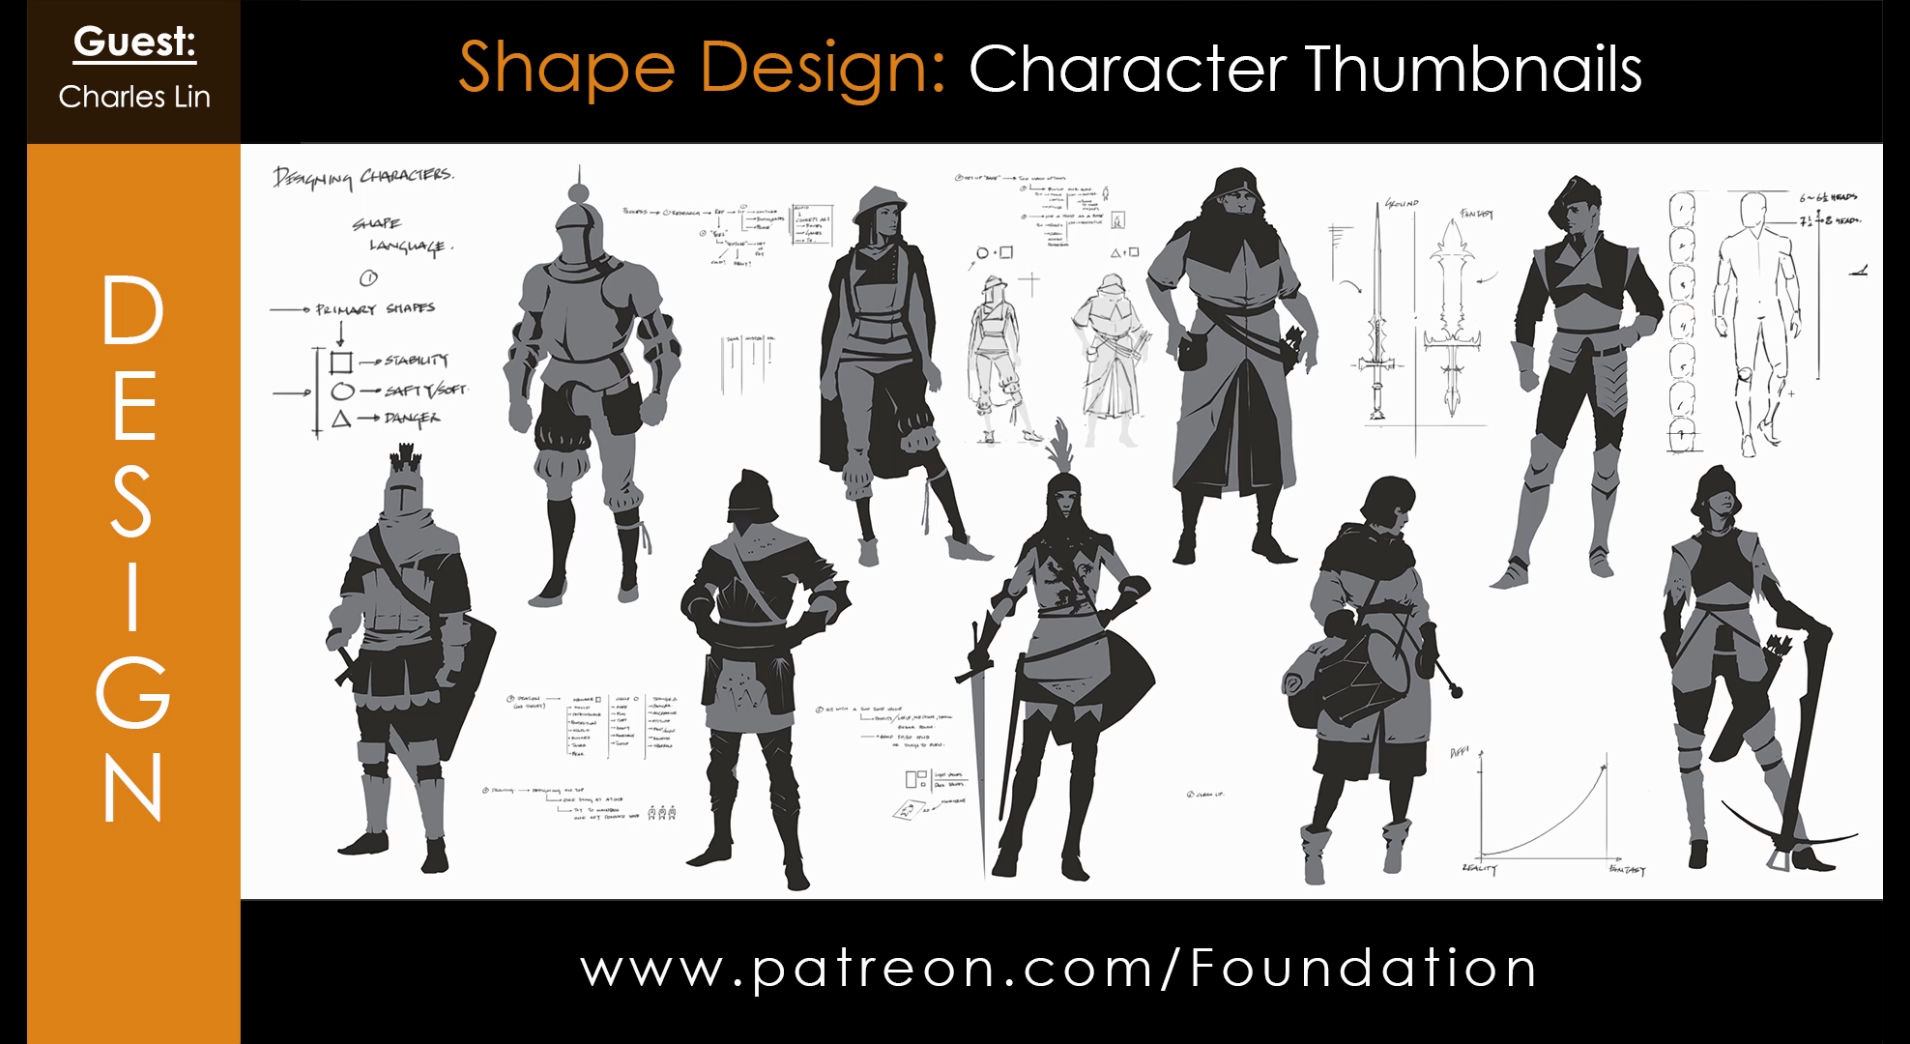 Shape Design – Character Thumbnail with Charles Lin